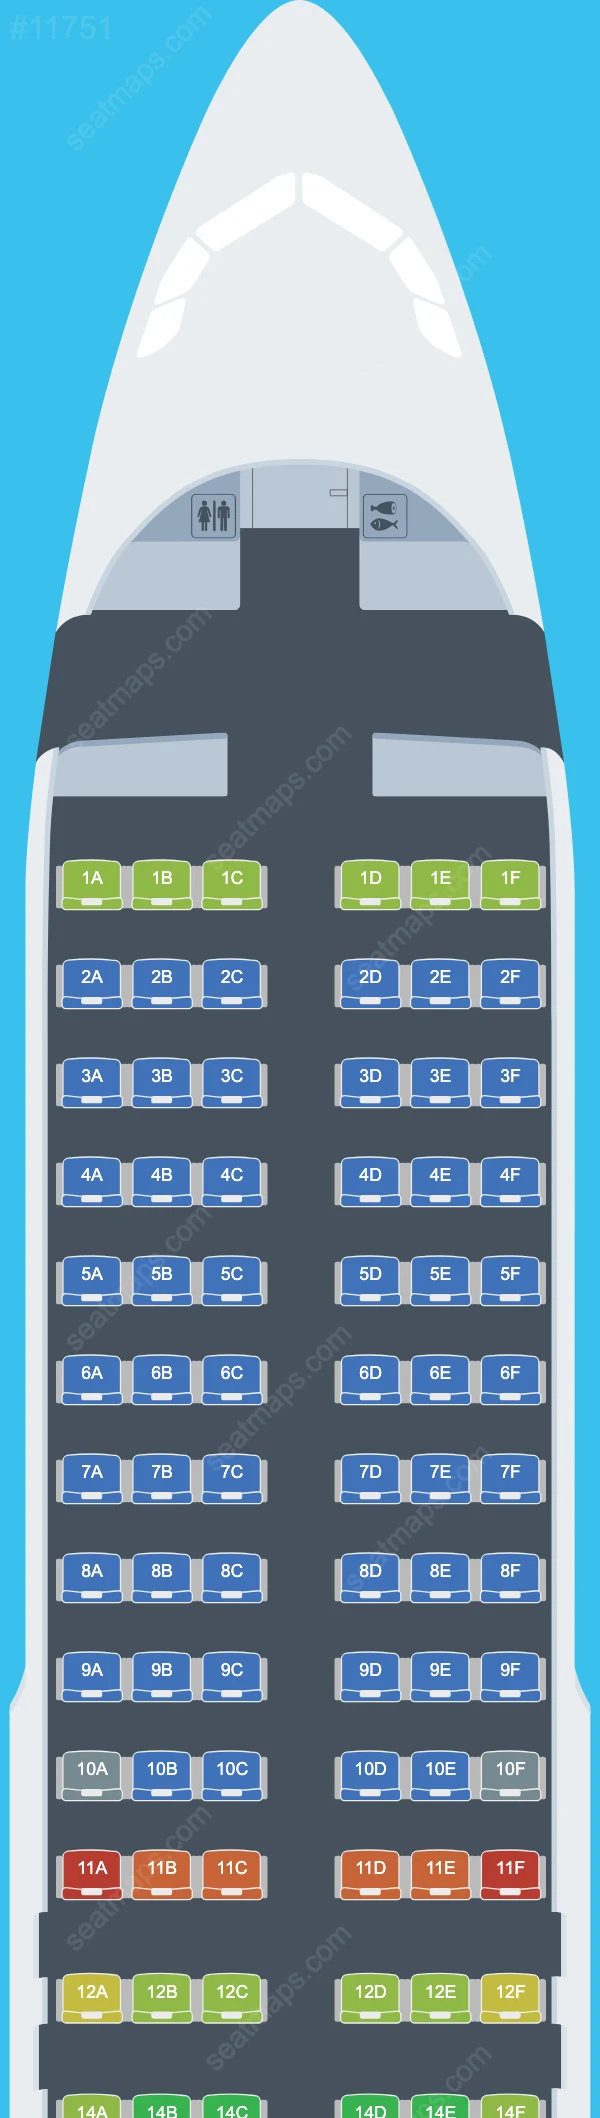 JetSMART Colombia Airbus A320neo aircraft seat map  A320neo